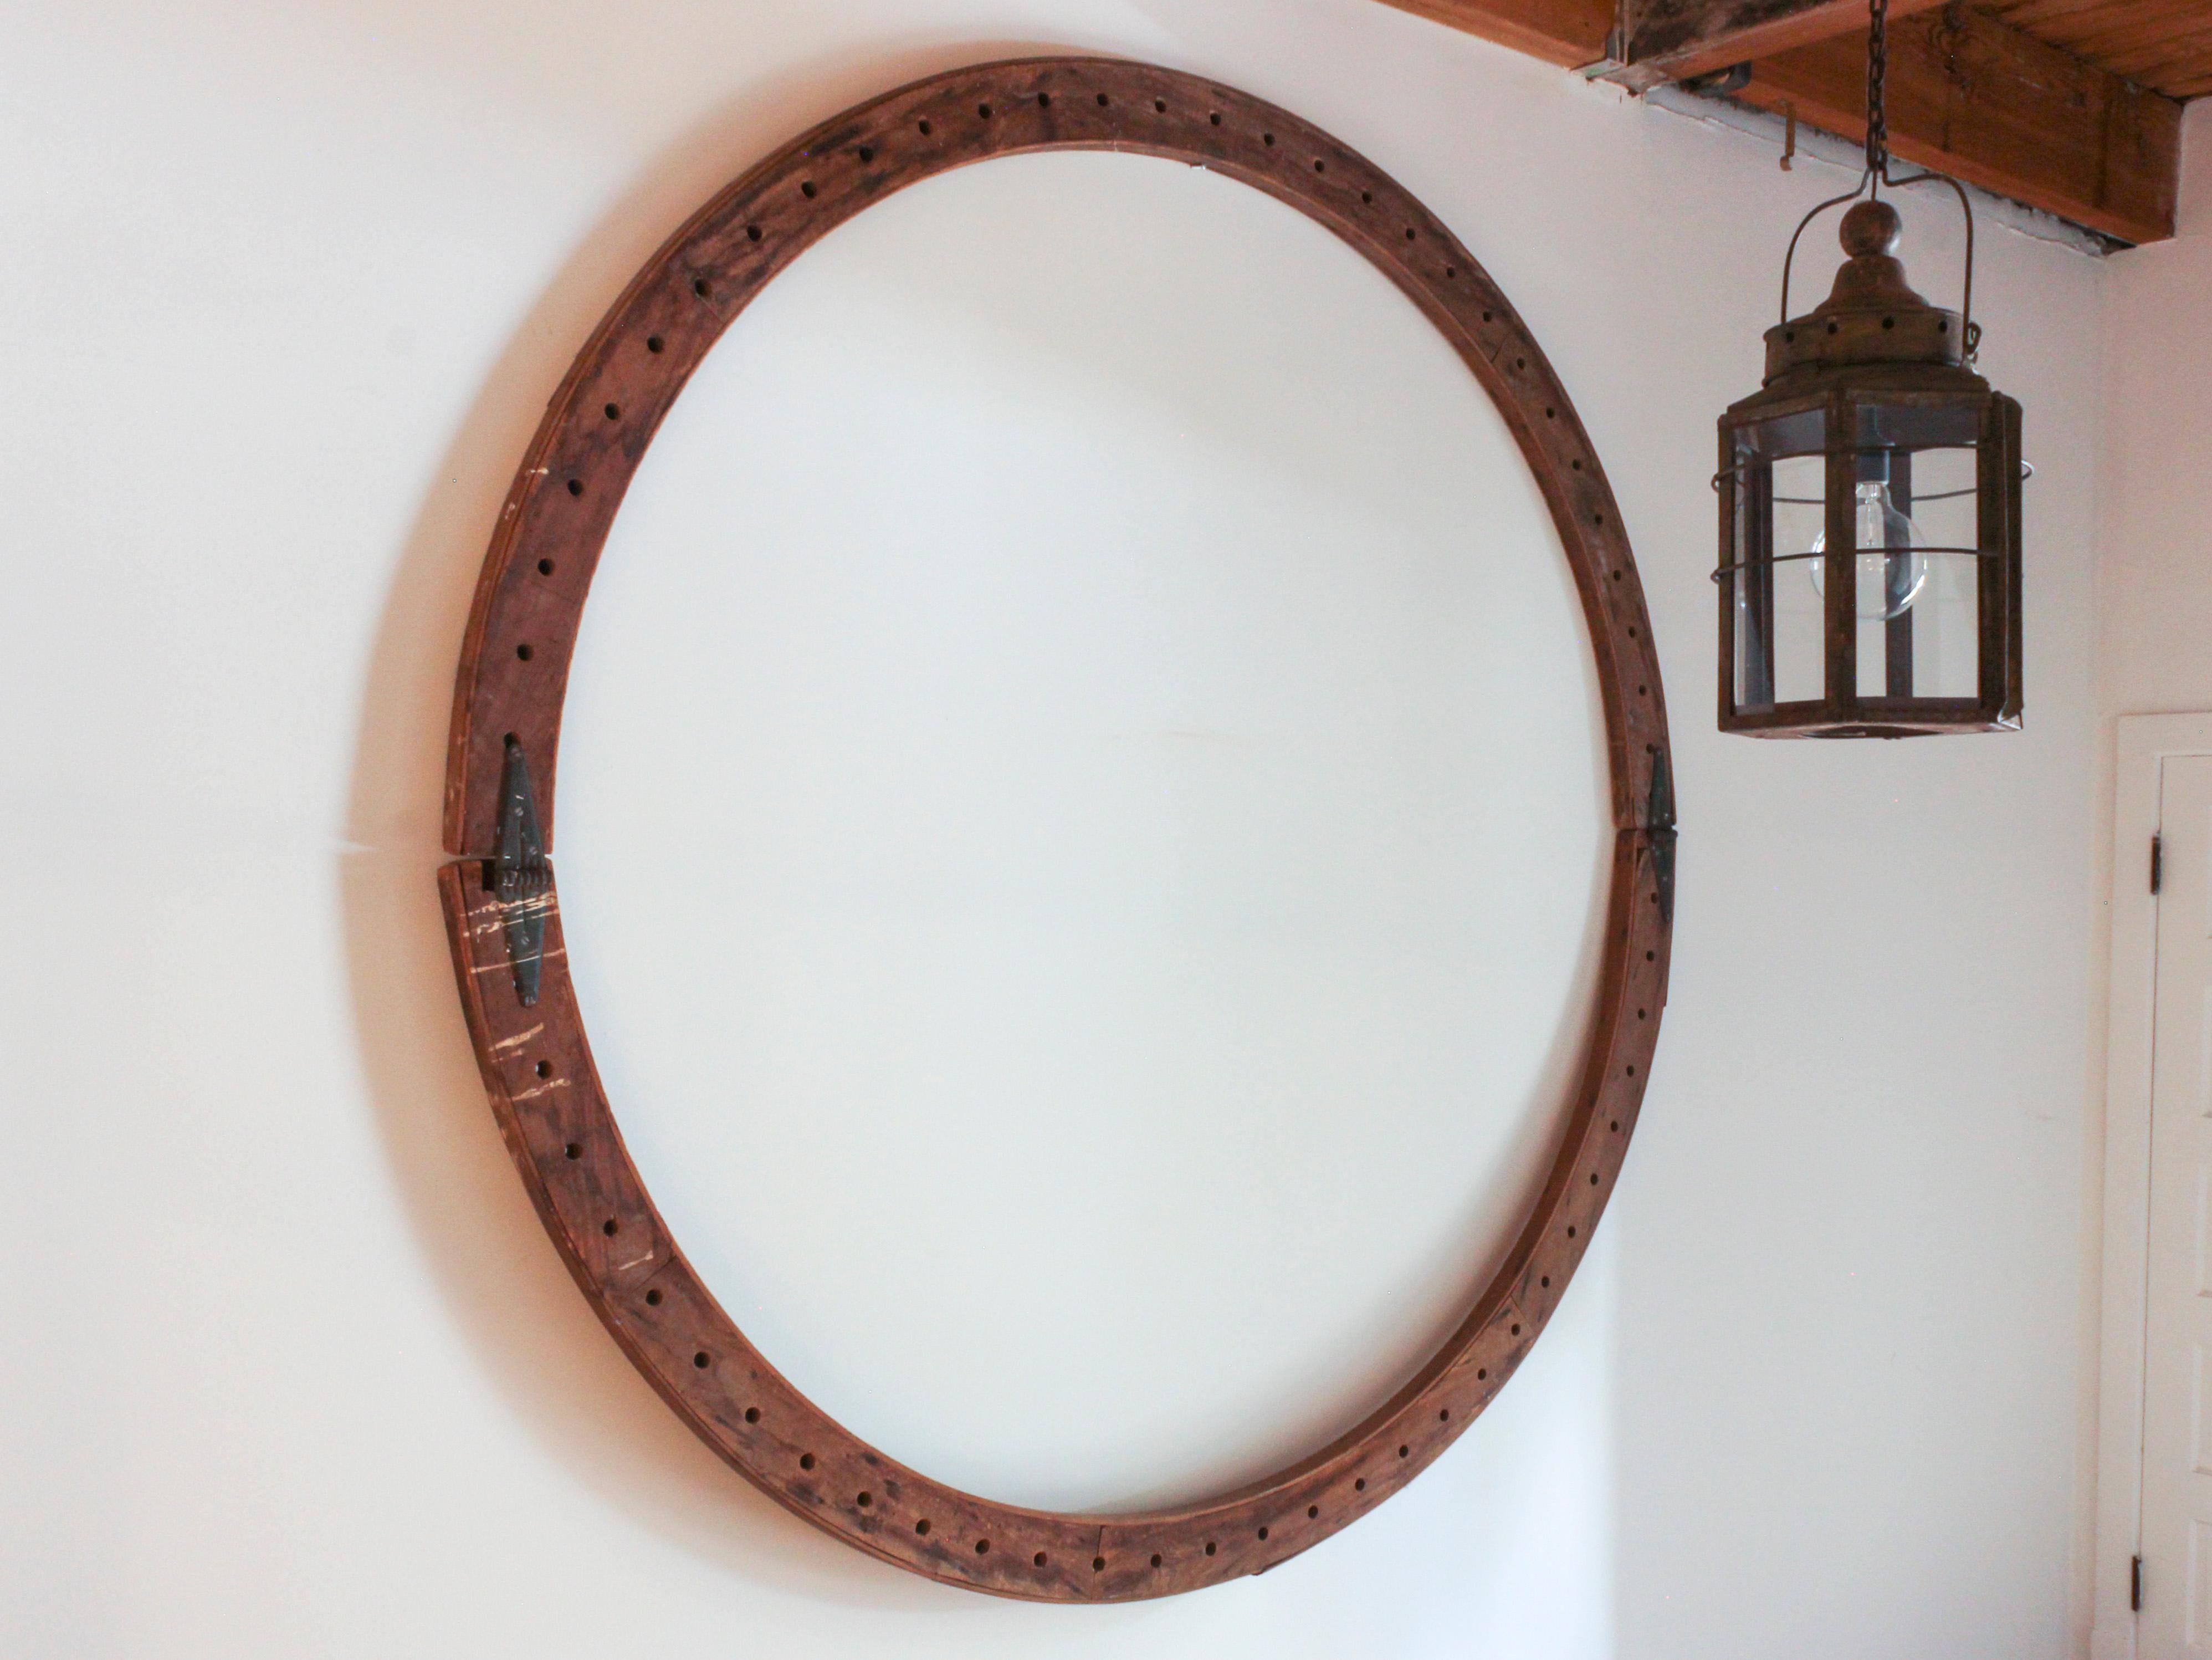 Massive rustic oak circle with hinges, American c. 1910. Architectural salvage, likely used as the top of a wooden vat/barrel. Wood: 1.75